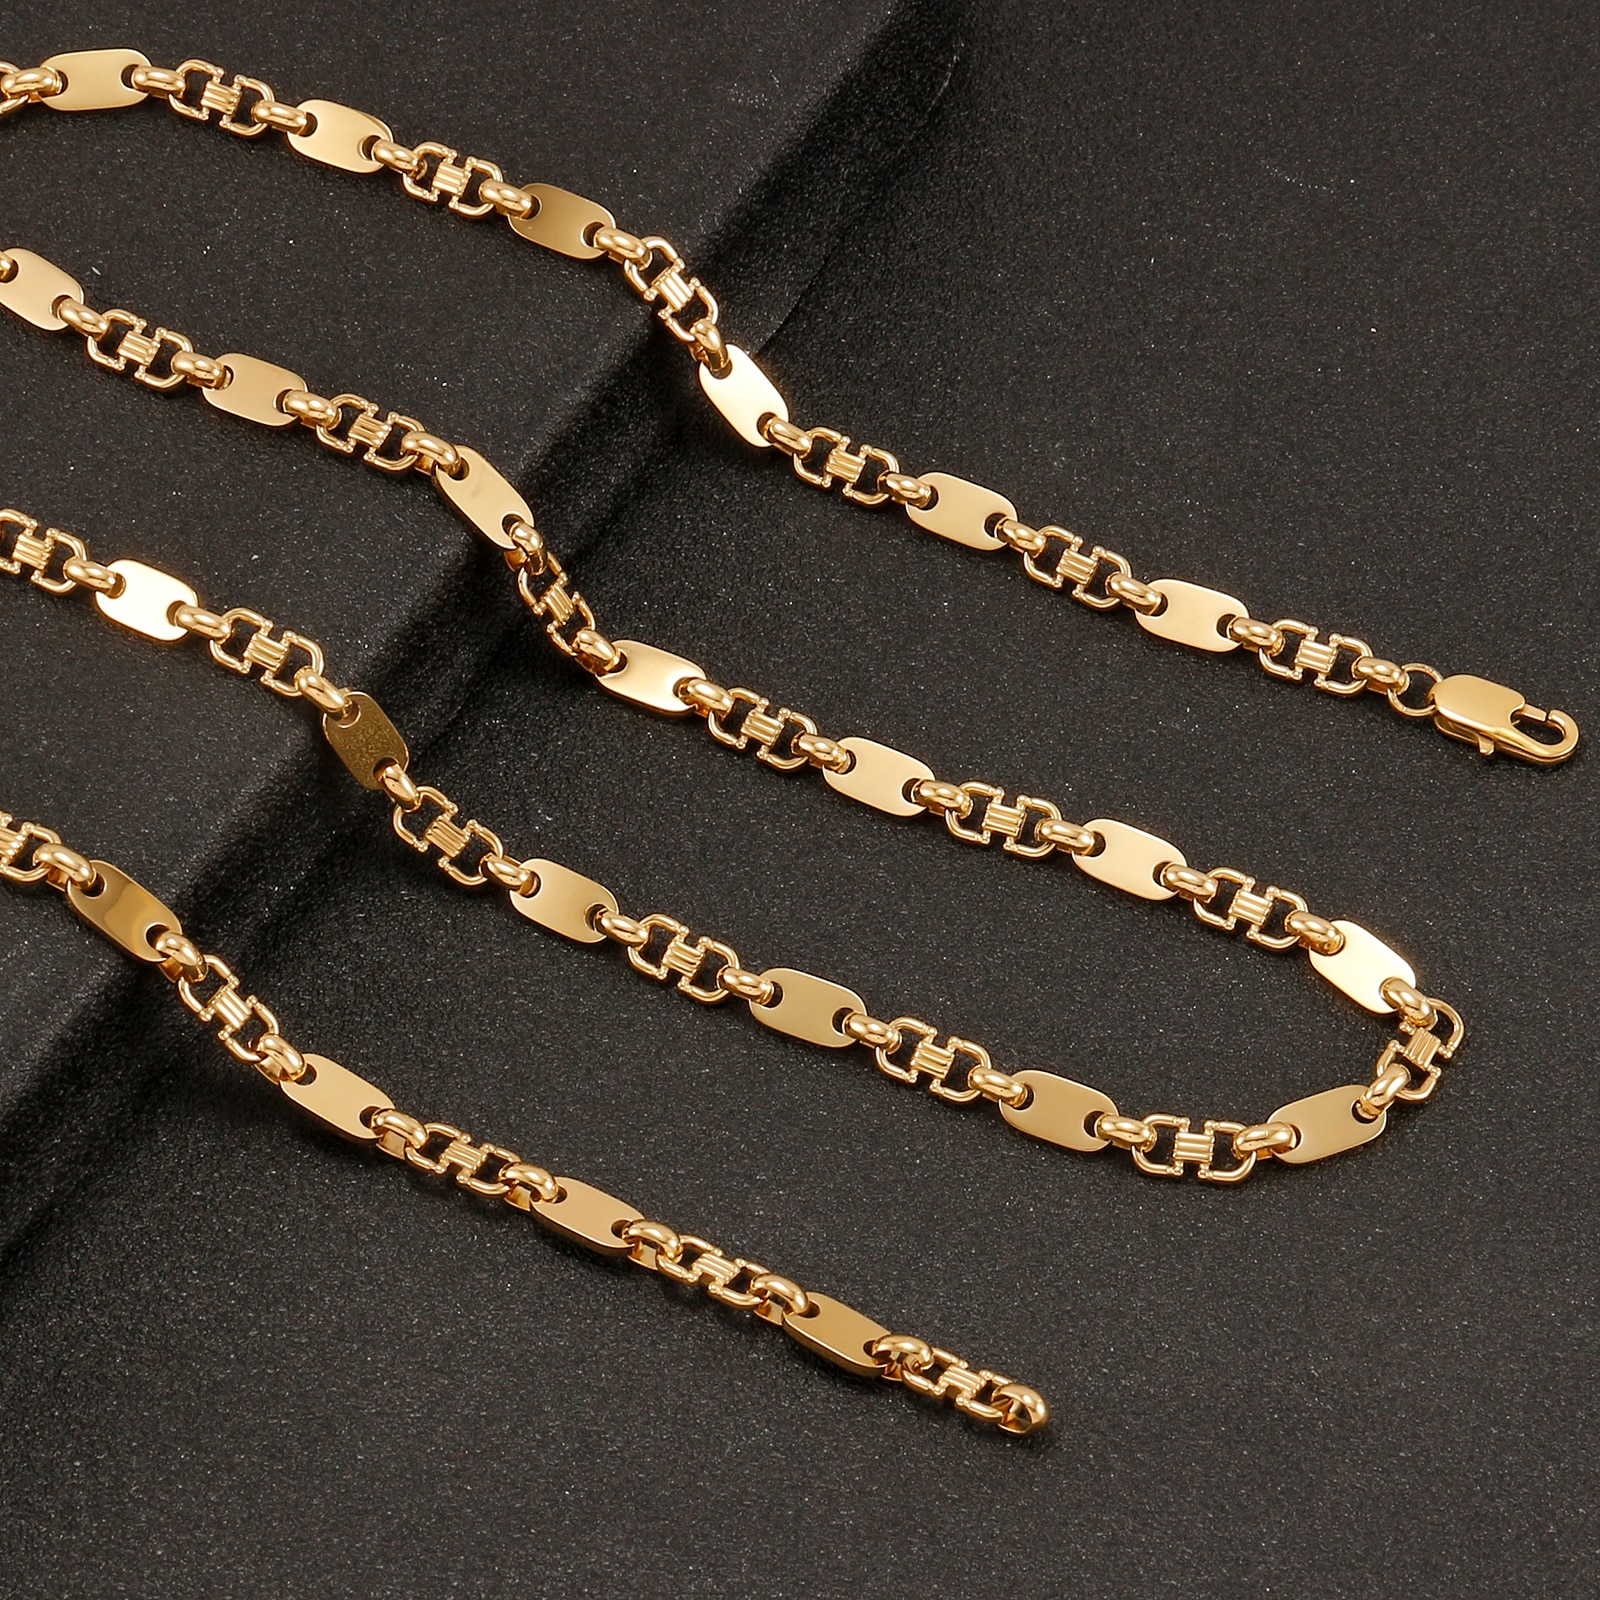 Golden Double D Necklace for Women Men Stainless Steel Hip Hop Curb Cuban Link Chain Bracelets Fashion Jewelry Accessories Gift